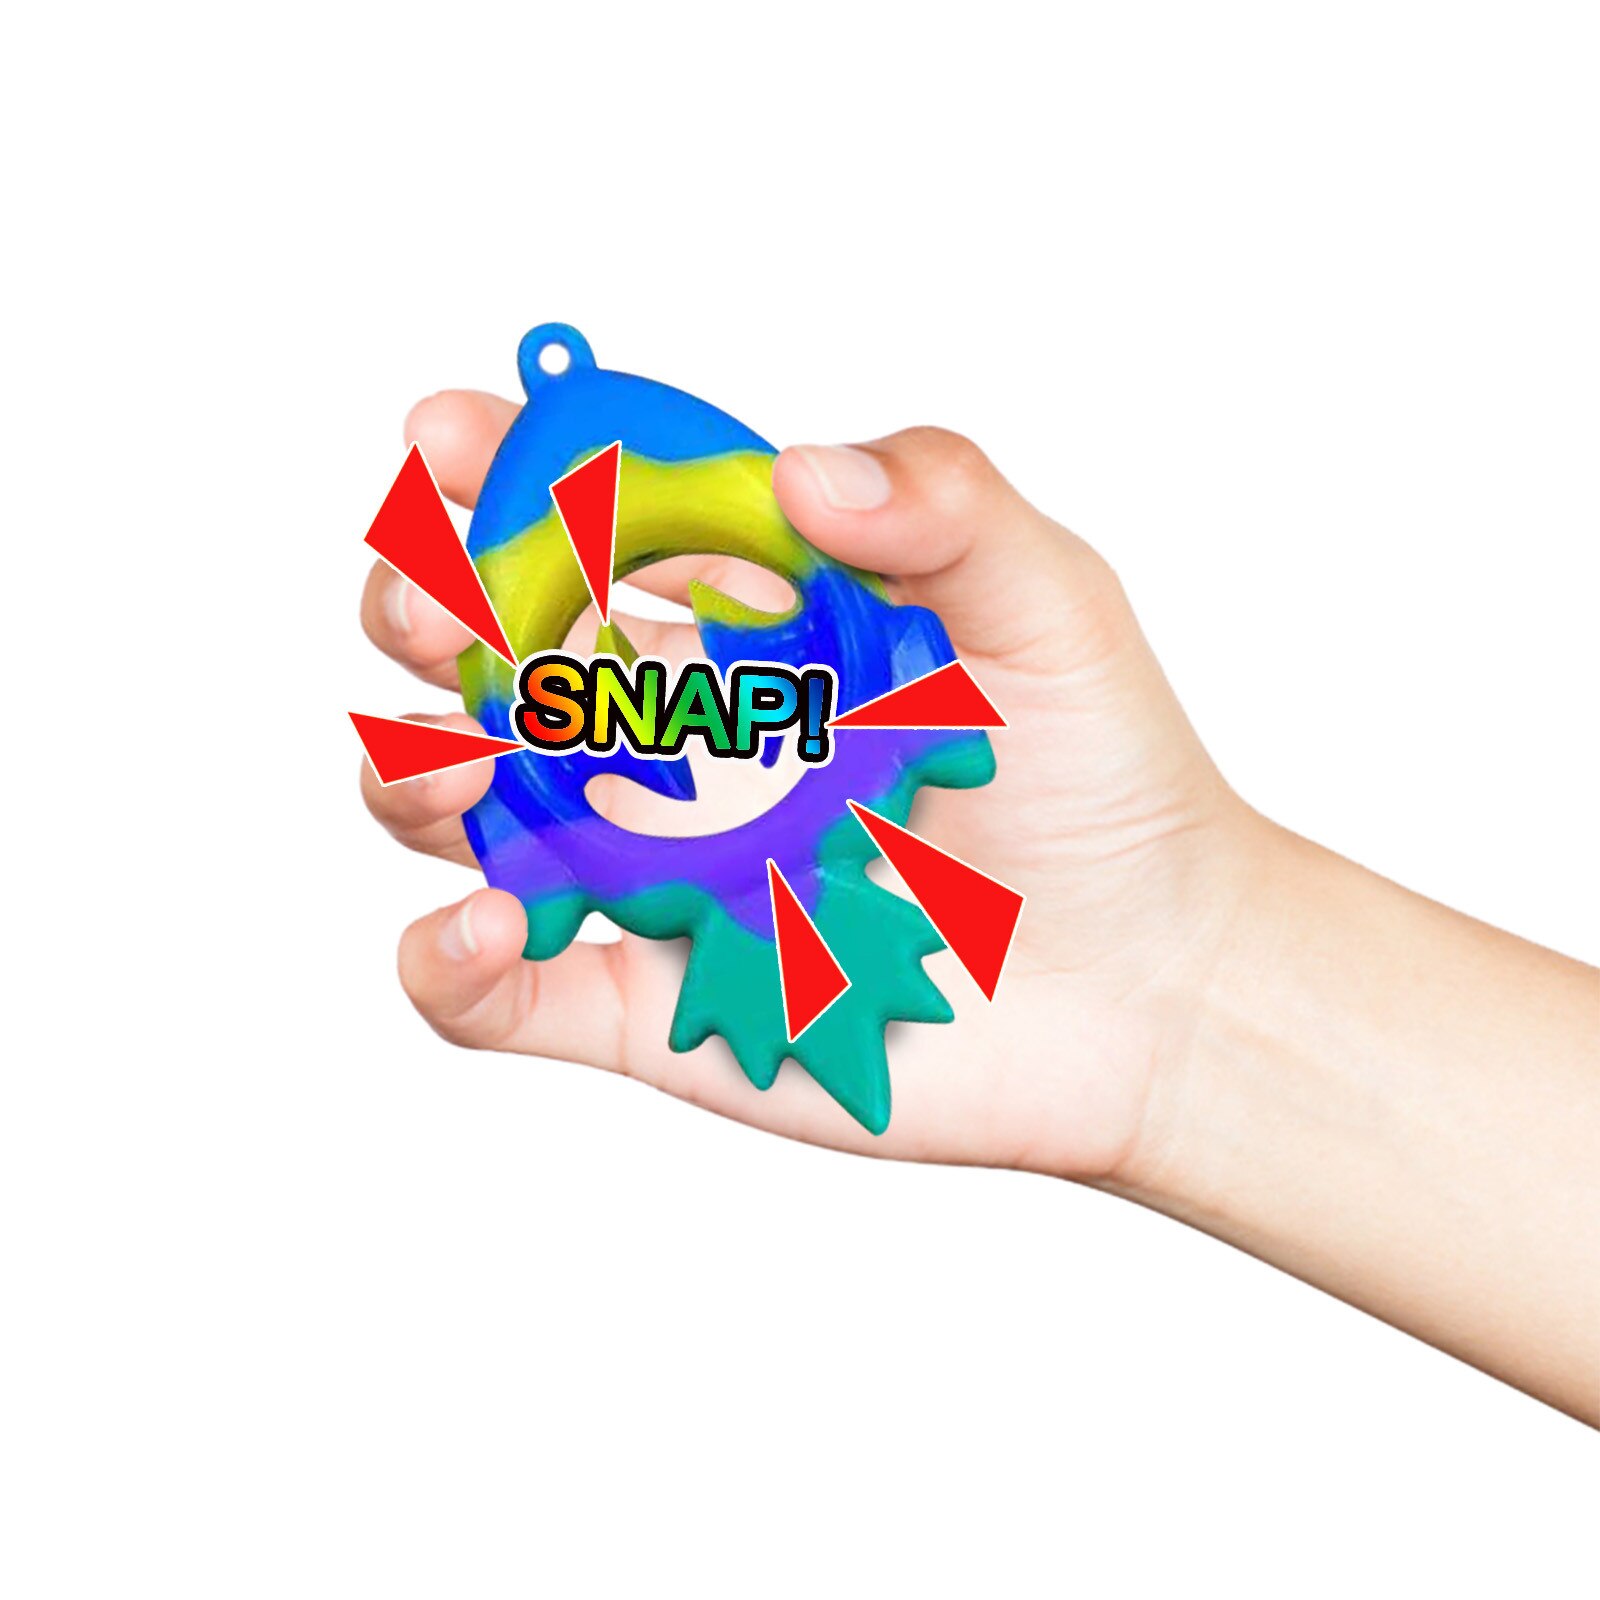 Simple Squeeze Fidget Grip Ring Hand Toys Reliever Stress Anti anxiety Snappers Silicone Snapperz Fidget Sensory 1 - Simple Dimple Fidget